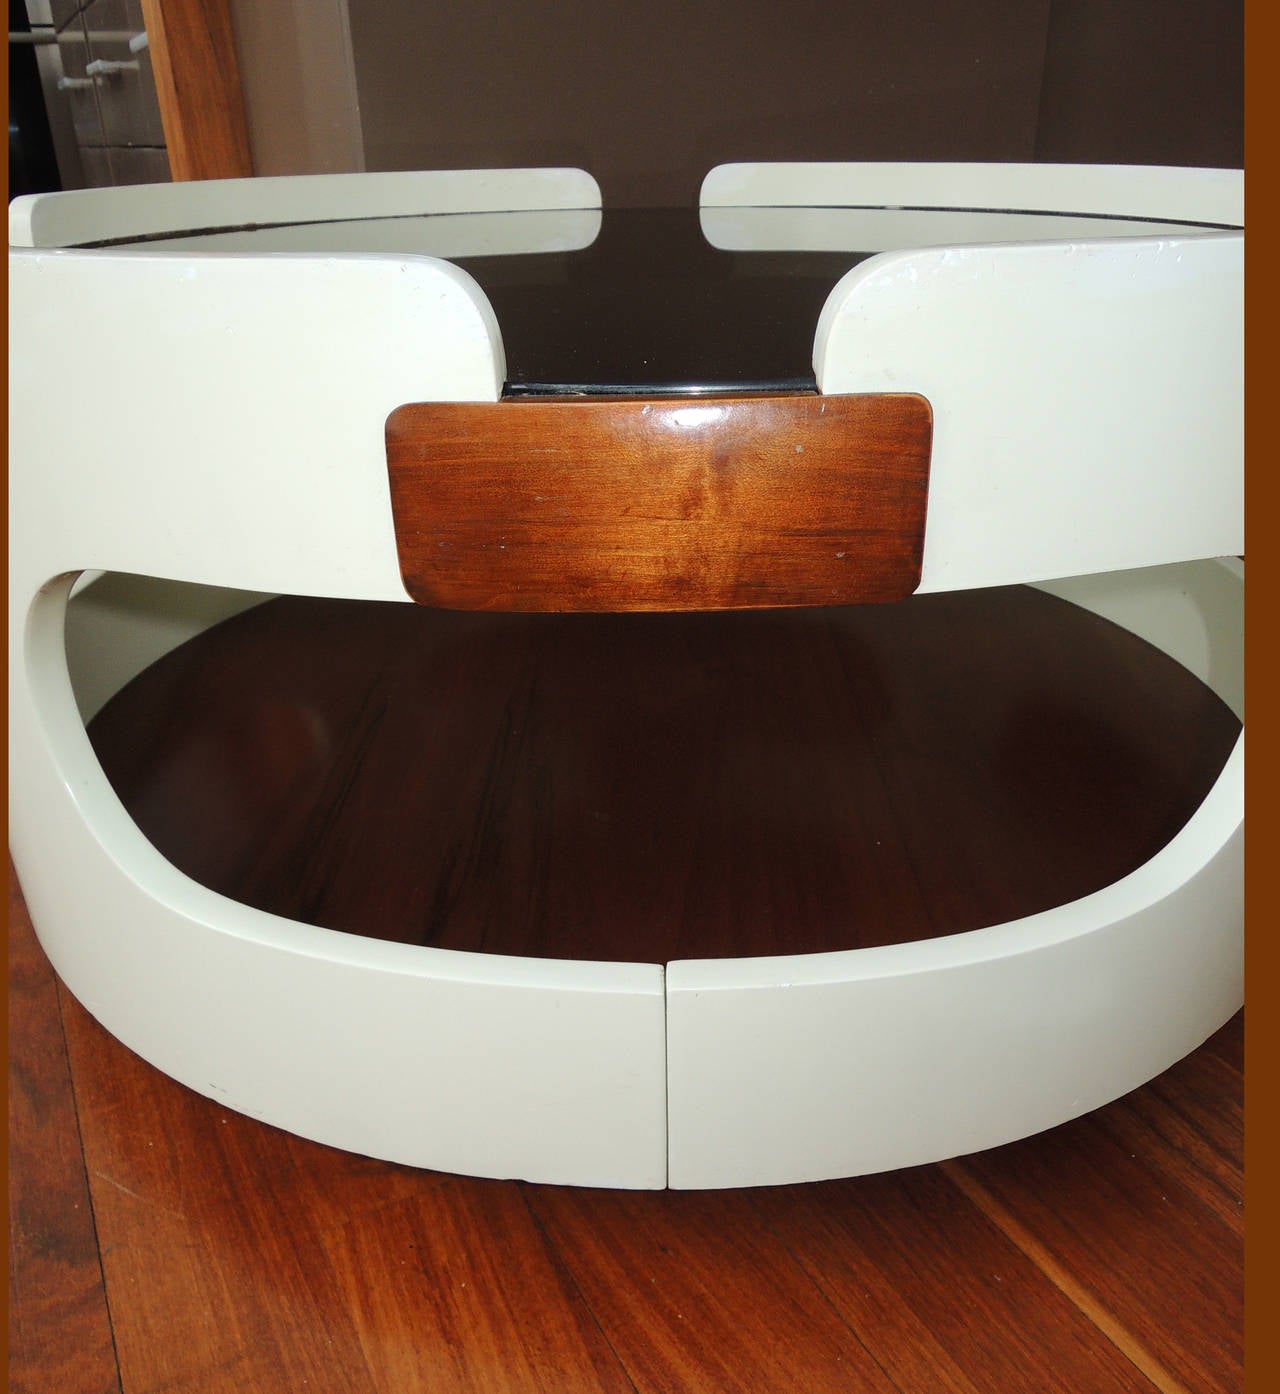 Groovy coffee table in the style of Colombo with cutouts. Lacquered curved wood, with smoked glass and mahogany. Floats on a mahogany base.